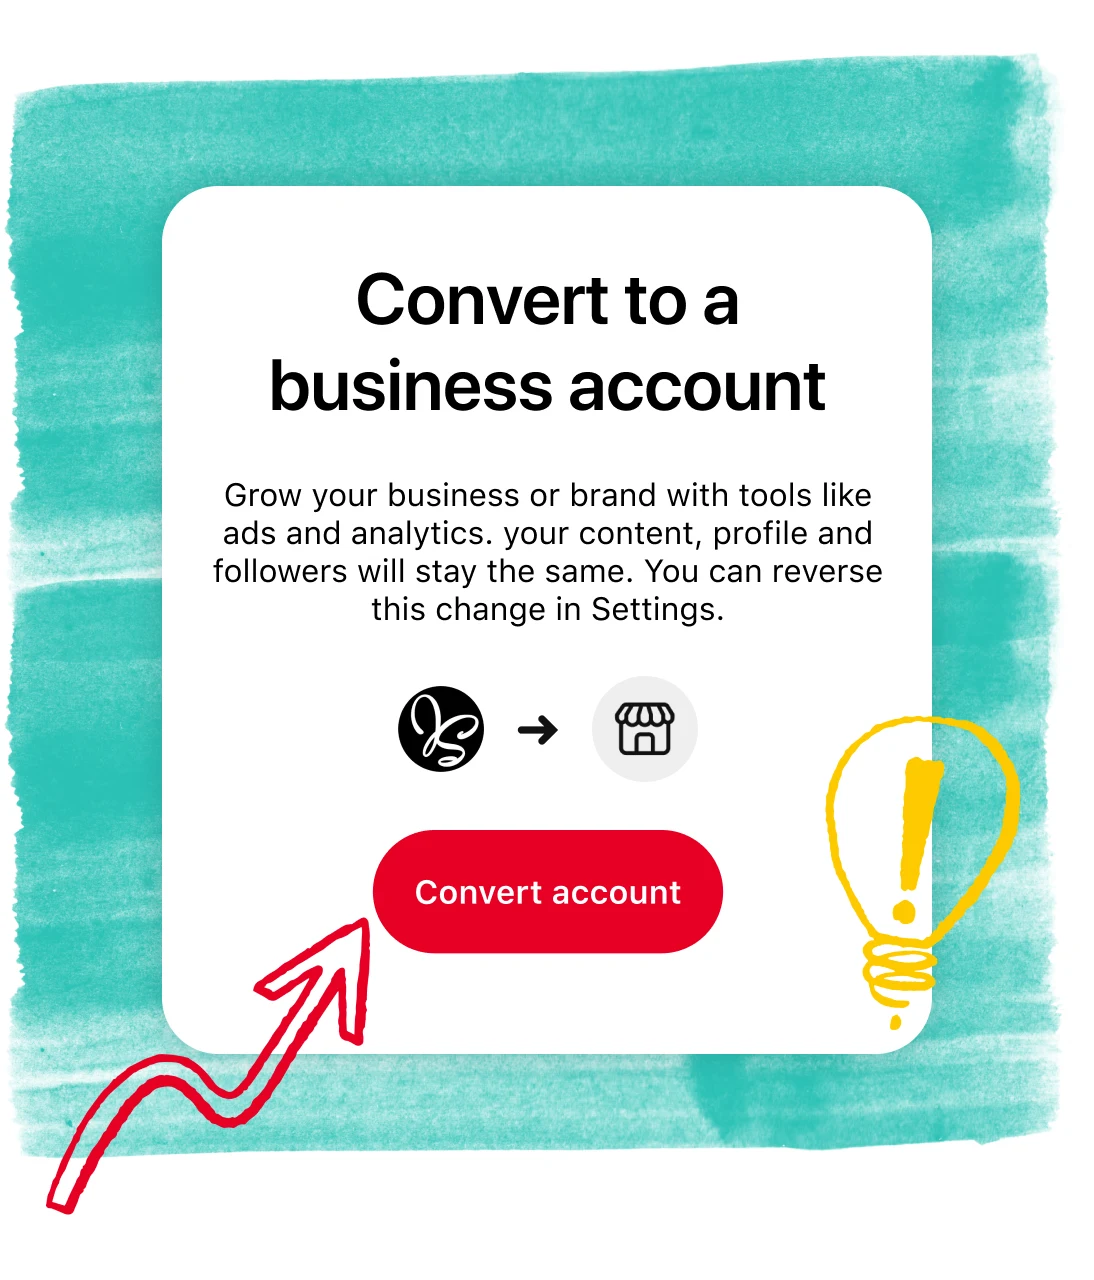 Pinterest app screen showing how to convert to business account